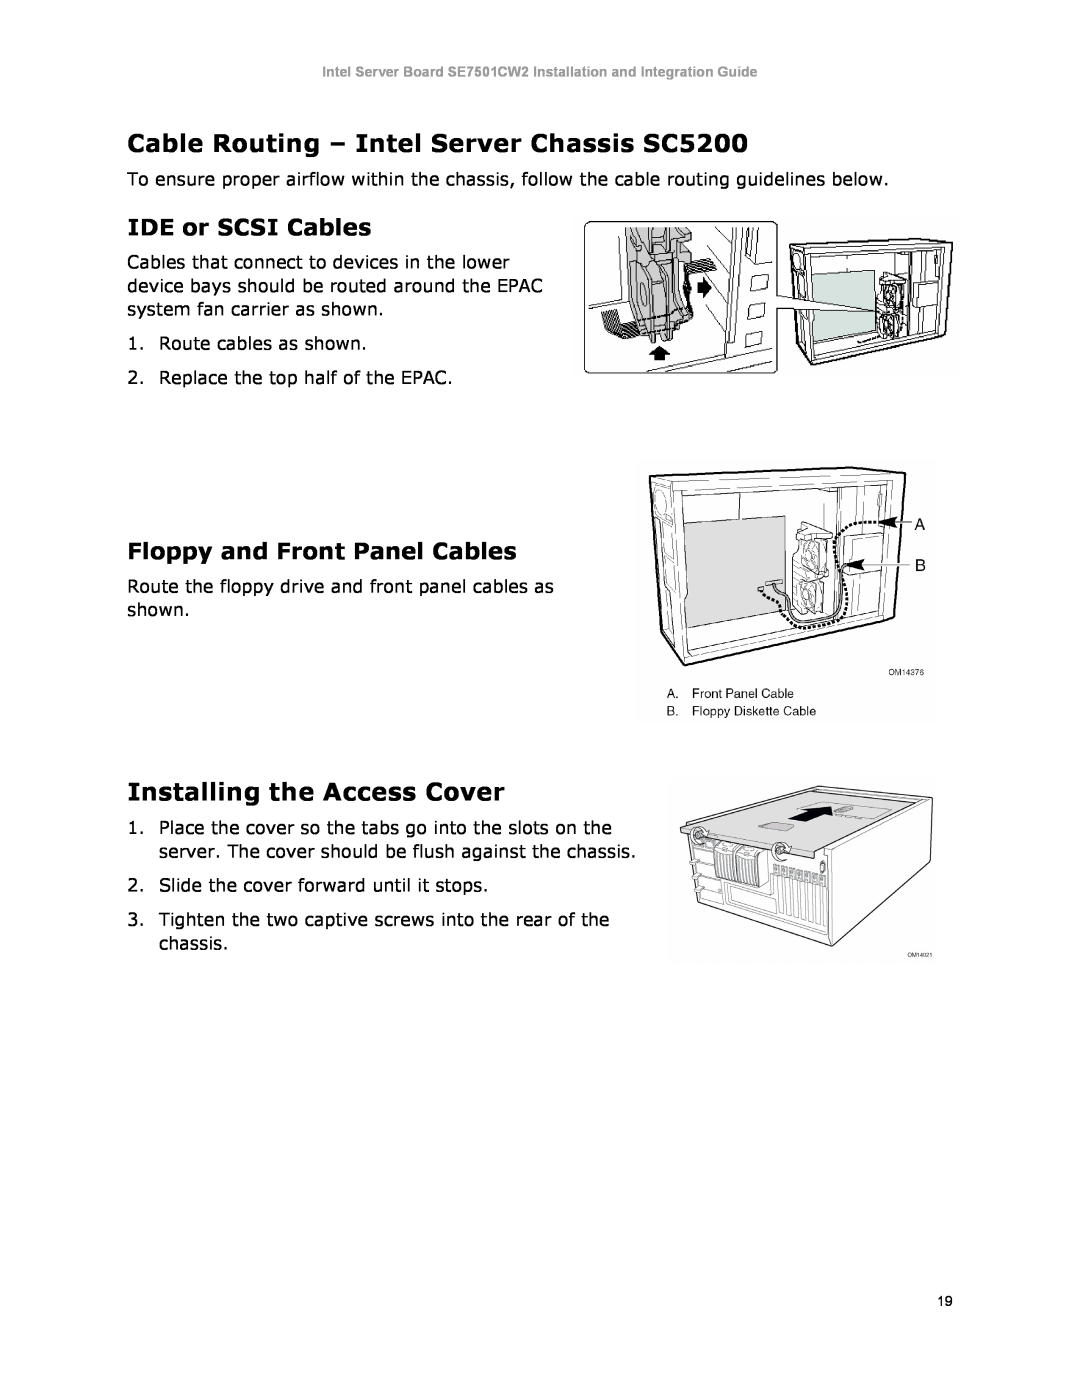 Intel SE7501CW2 manual Cable Routing - Intel Server Chassis SC5200, Installing the Access Cover, IDE or SCSI Cables 